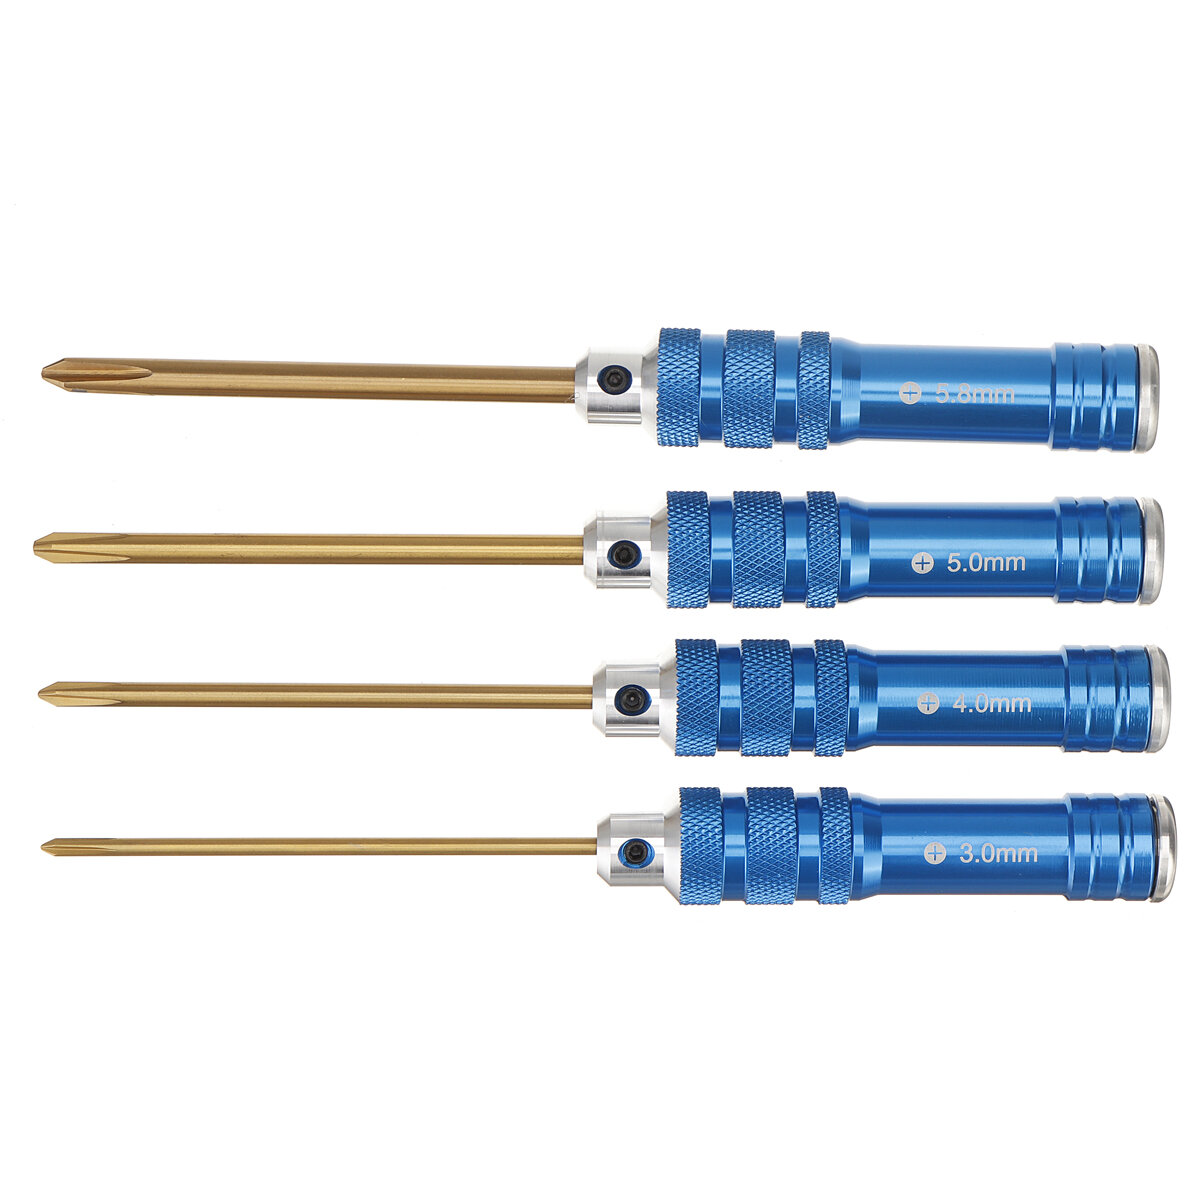 4PCS RJXHOBBY Phillips Screwdriver Tools Kit Set 3.0mm/4.0mm/5.0mm/5.8mm for RC FPV Car Boat Airplan